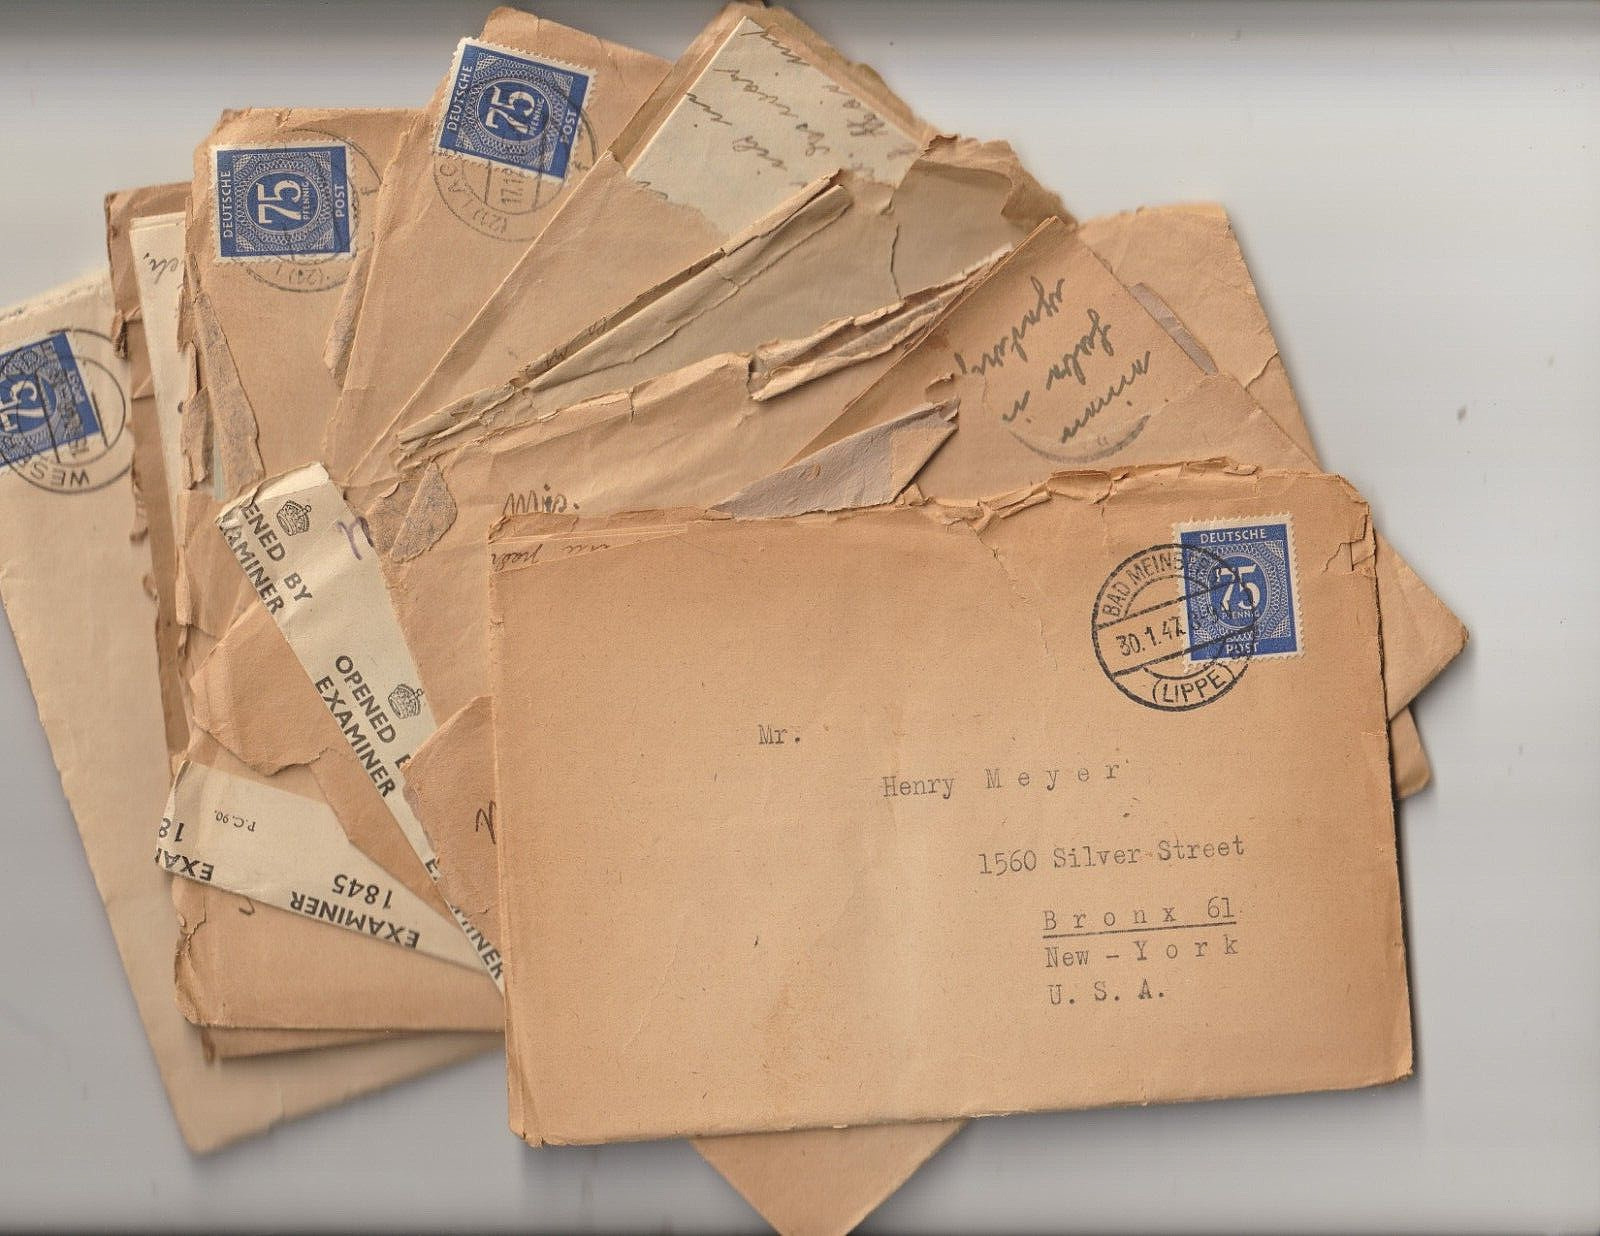 Germany to US Collection Historical Letters Post WW2 1946-47 Allied British Zone